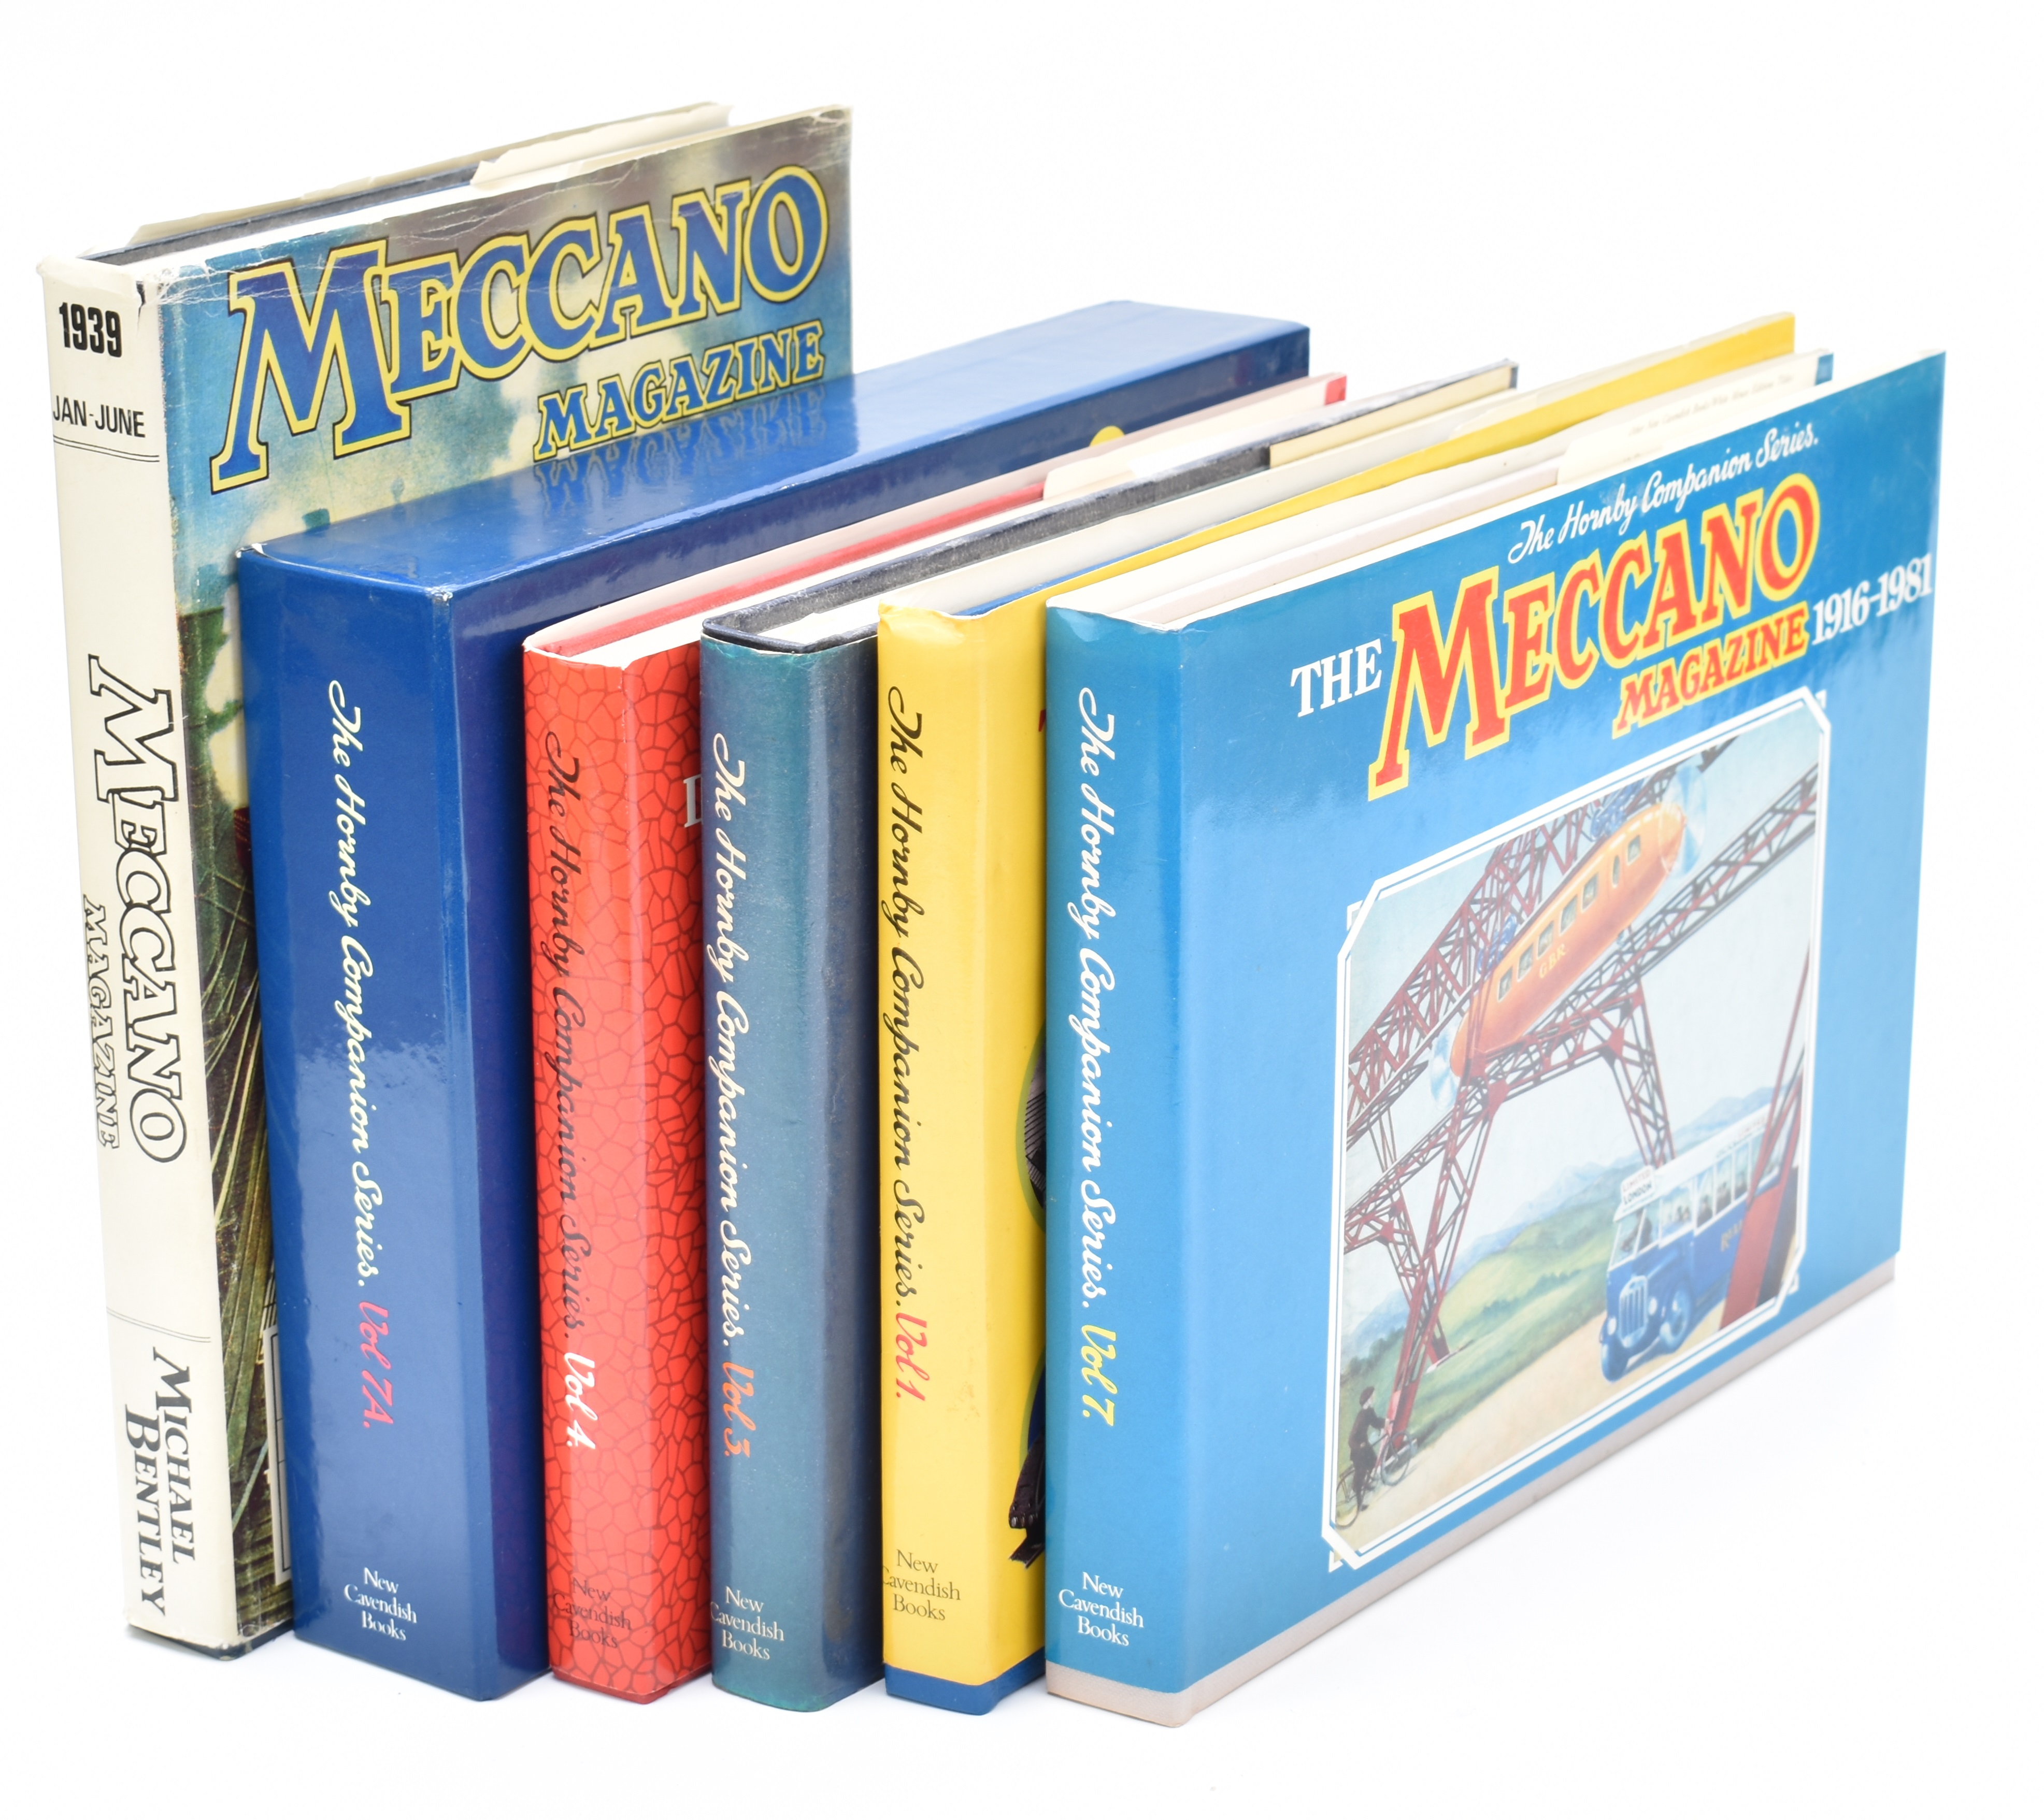 Five Hornby Companion books comprising volumes 1, 3, 4, 7 and 7A together with the Meccano